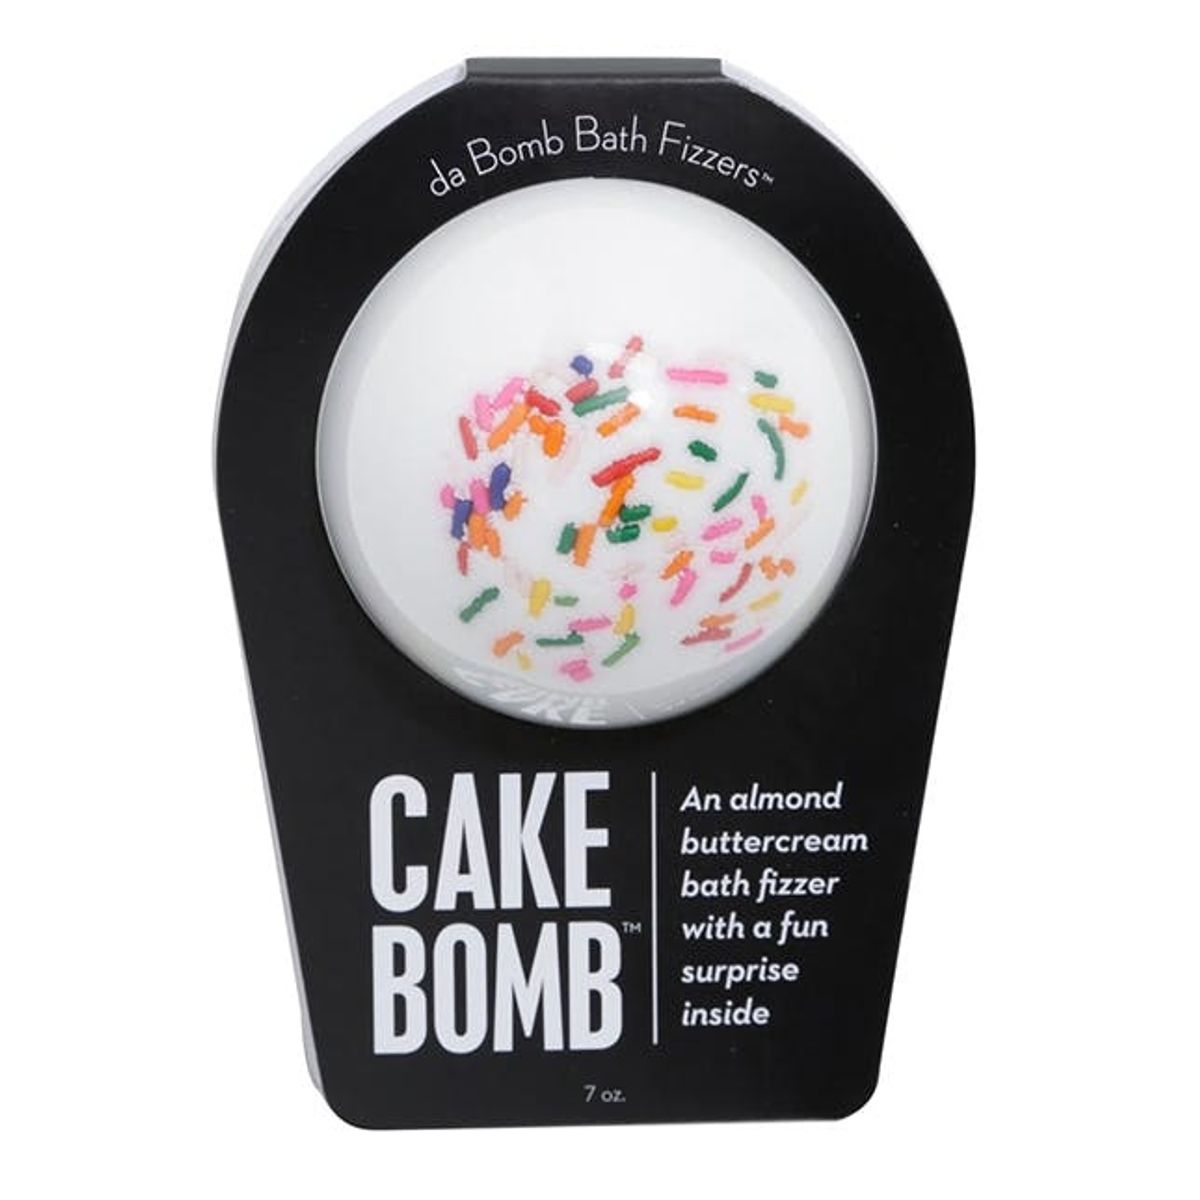 12 Bath Bombs That Won’t Stain Your Tub